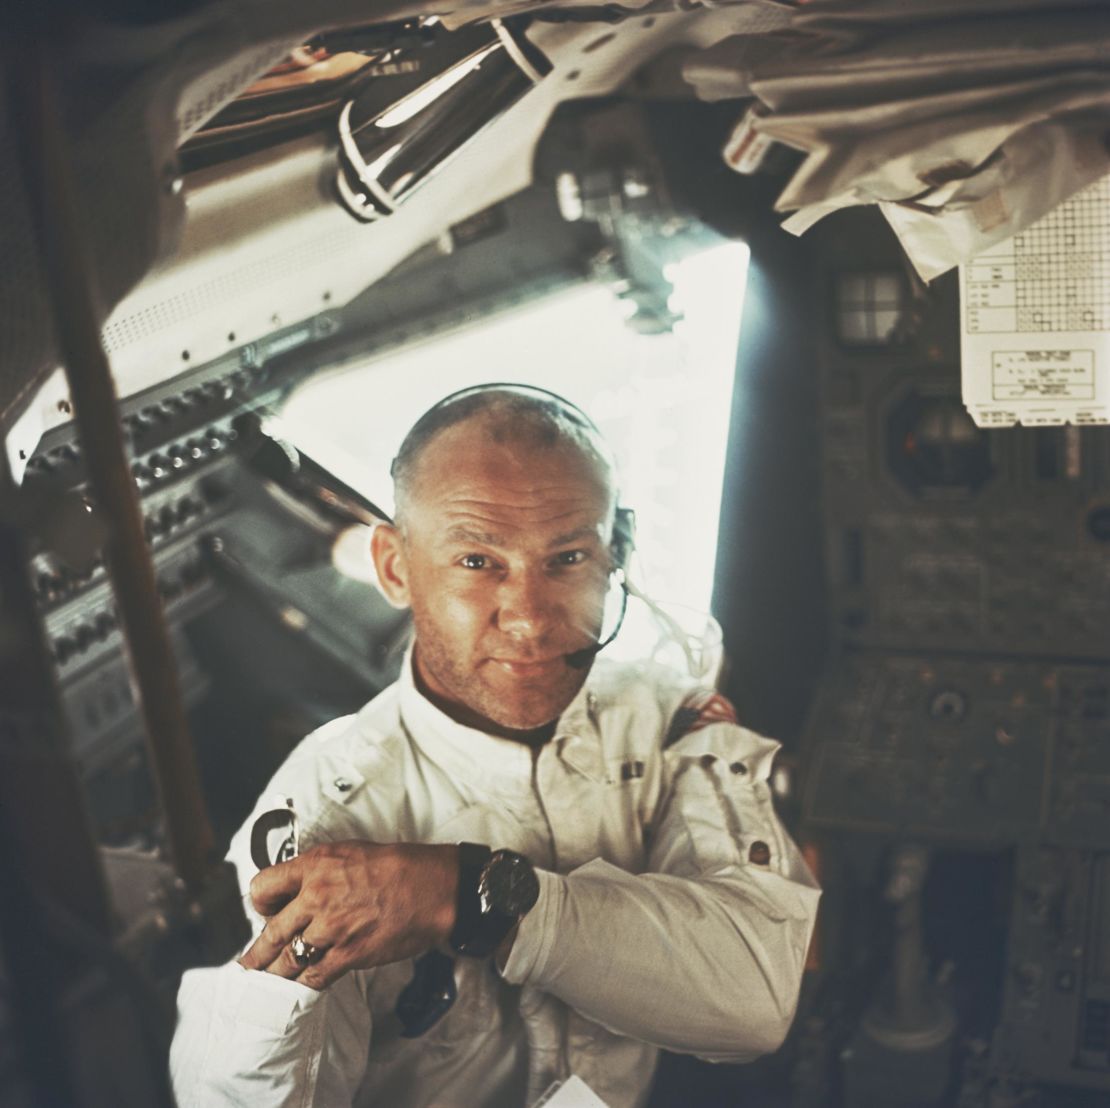 Buzz Aldrin photographed by Neil Armstrong in Apollo 11's lunar module during the moon landing mission on July 20, 1969.